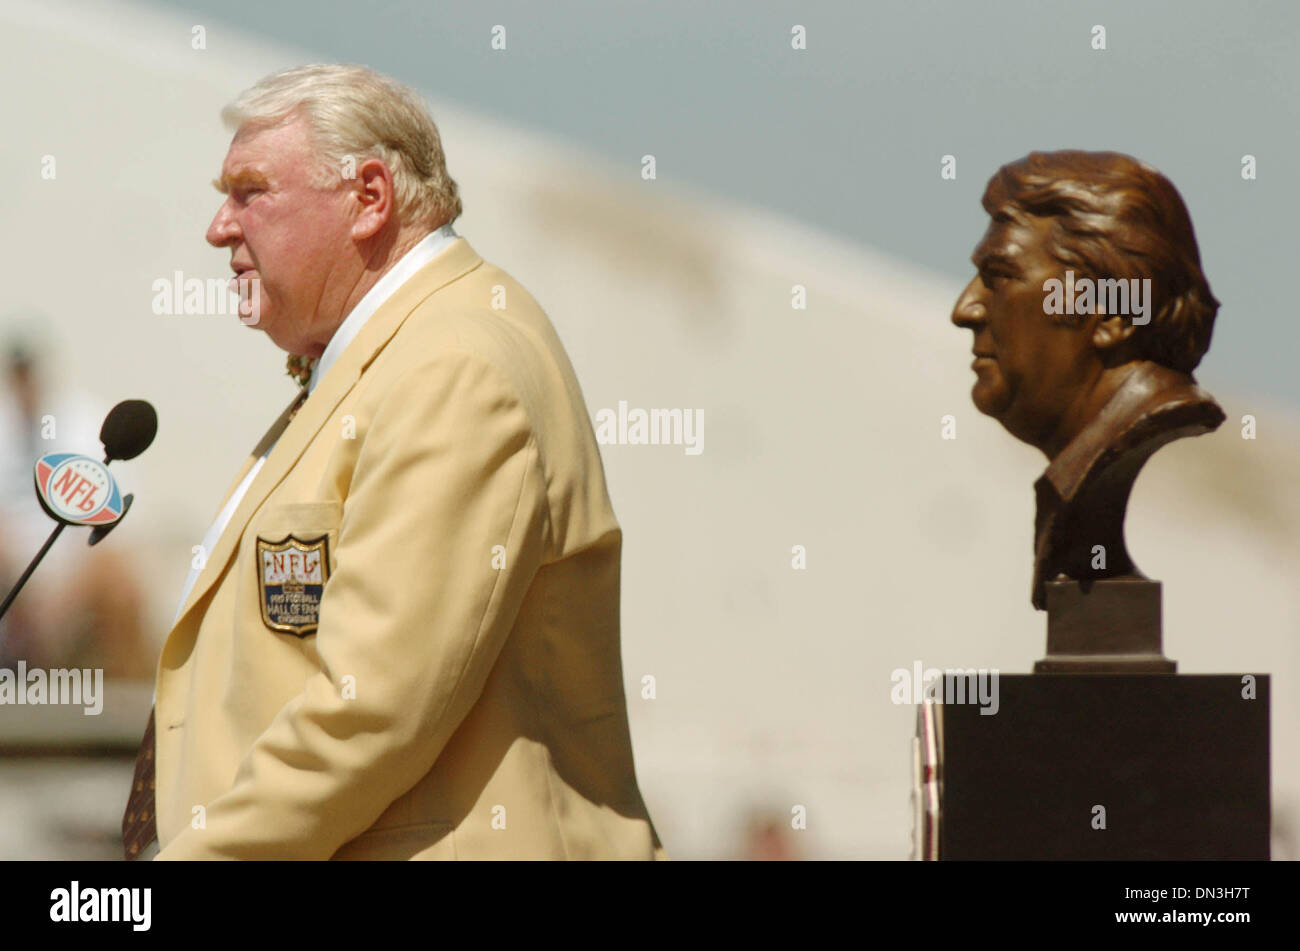 Aug 05, 2006; Canton, OH, USA; Pro Football Hall of Fame Head Coach JOHN MADDEN speaks to a large crowd during the Pro Football Hall of Fame ceremonies at Fawcett Stadium in Canton, Ohio Saturday August 5,2006. Mandatory Credit: Photo by Bob Larson/Contra Costa Times/ZUMA Press. (©) Copyright 2006 by Contra Costa Times Stock Photo